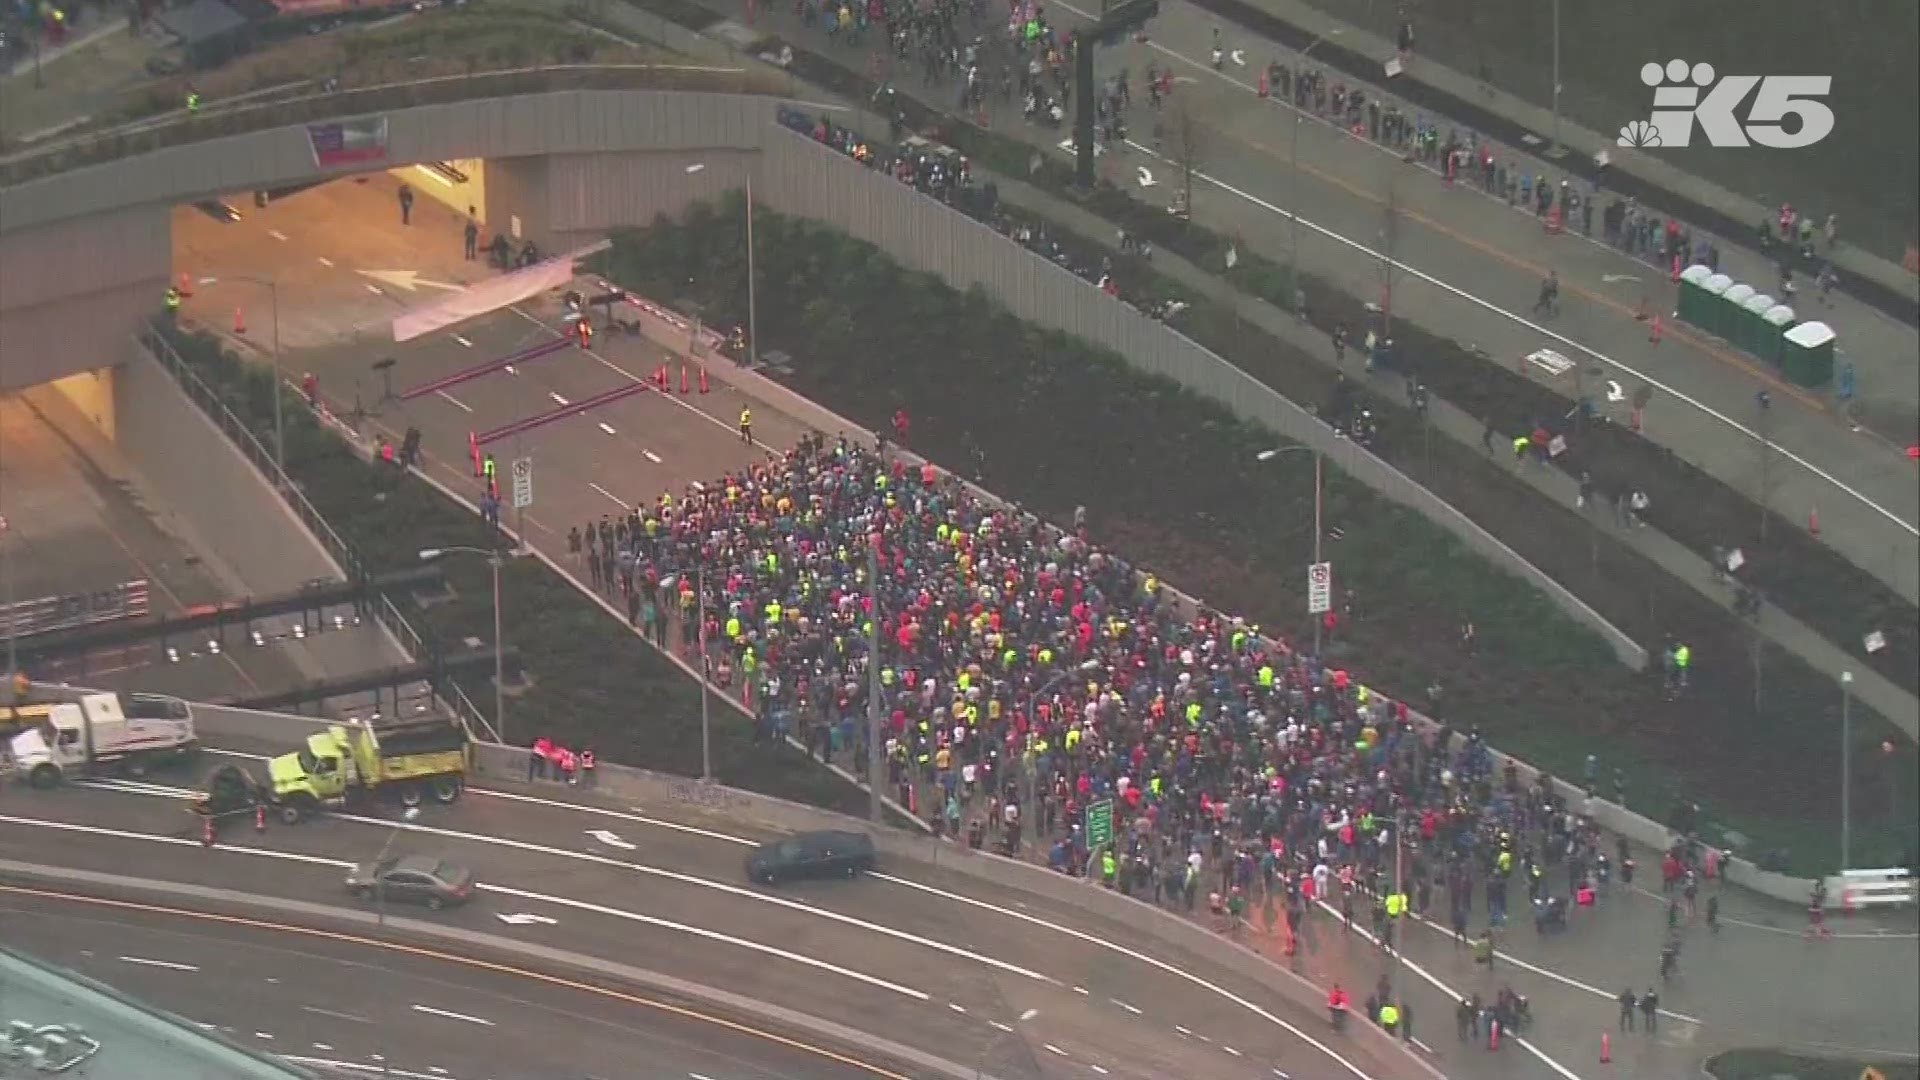 SkyKING aerials capture thousands of runners in the 8K fun run during the Seattle tunnel celebration on February 2, 2019.